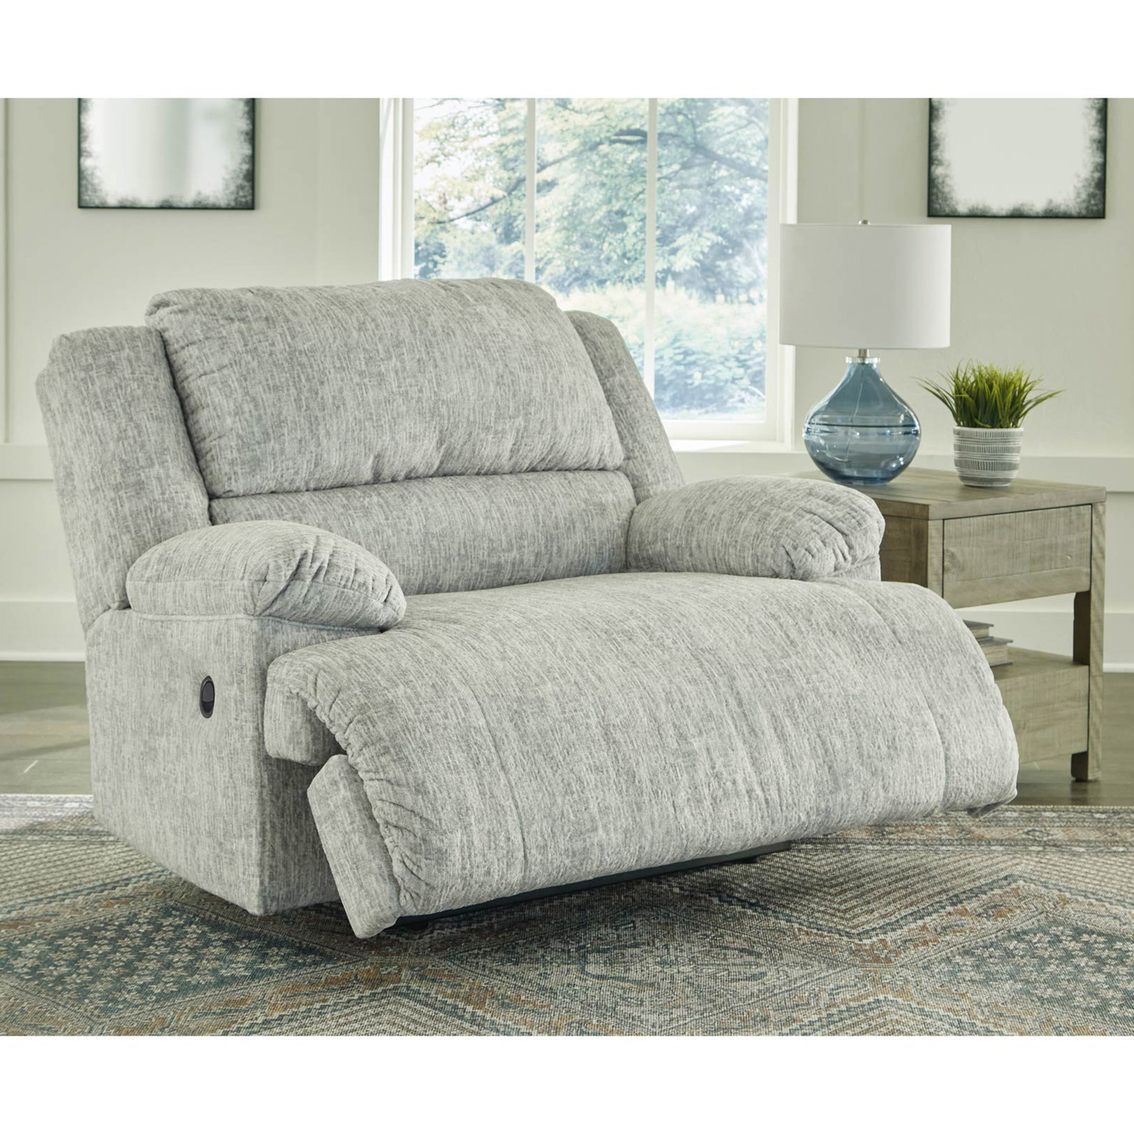 Signature Design by Ashley McClelland Oversized Recliner - Image 4 of 6